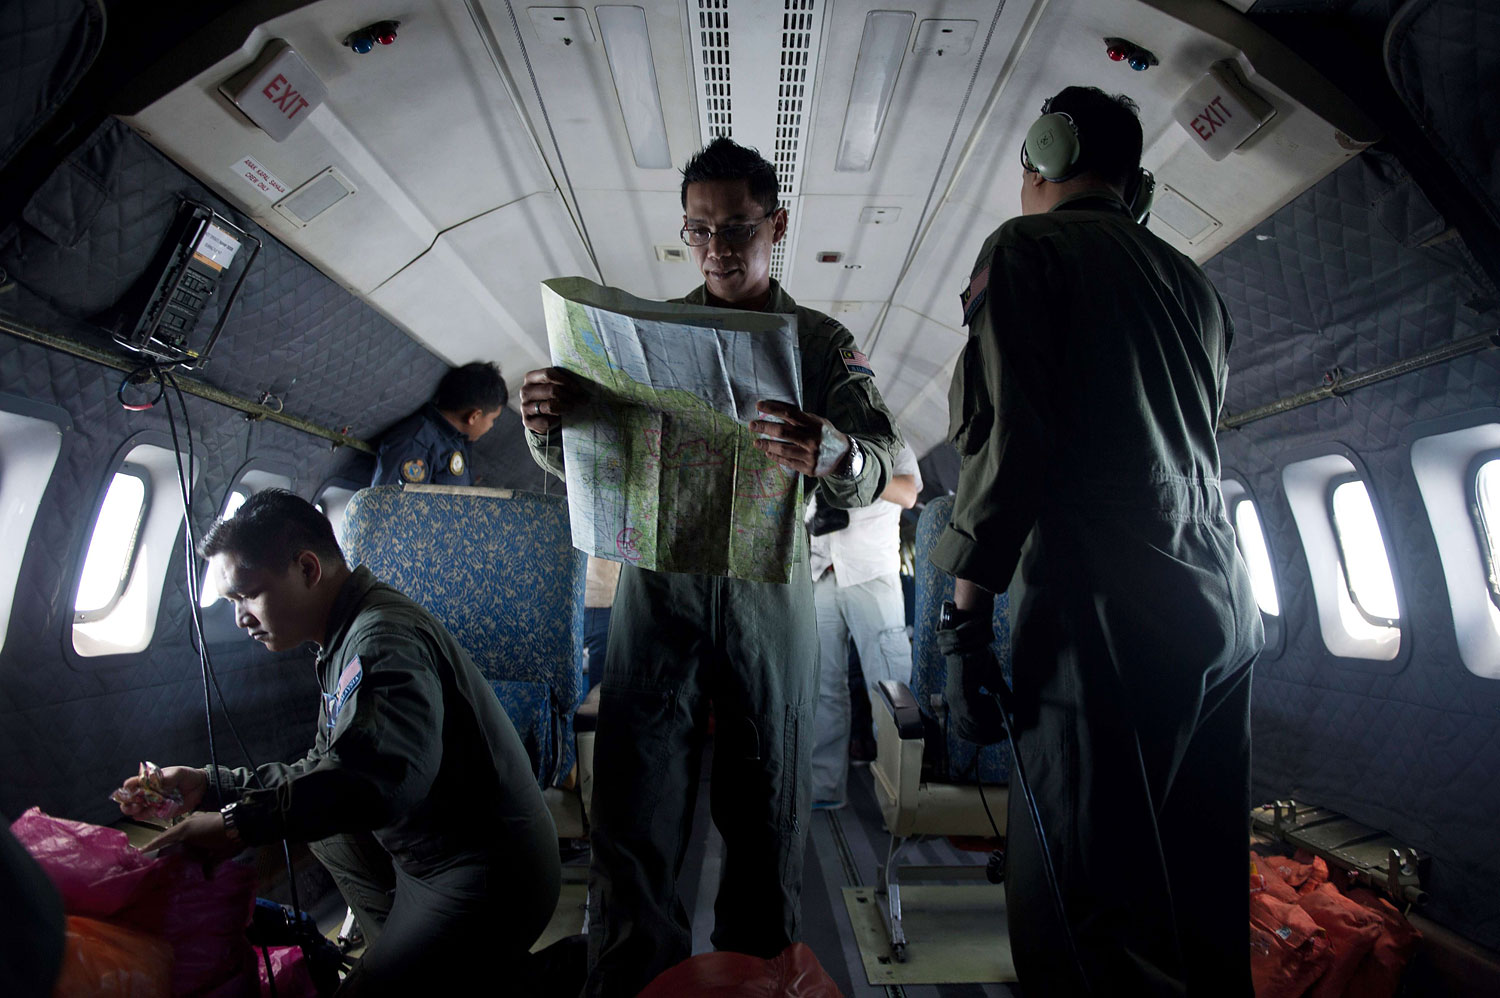 A Royal Malaysian Air Force Navigator captain, Izam Fareq Hassan, center, looks at a map onboard a Malaysian Air Force CN235 aircraft during a search and rescue (SAR) operation to find the missing Malaysia Airlines flight MH370 plane over the Strait of Malacca on March 14, 2014. (Mohd Rasfan—AFP/Getty Images)